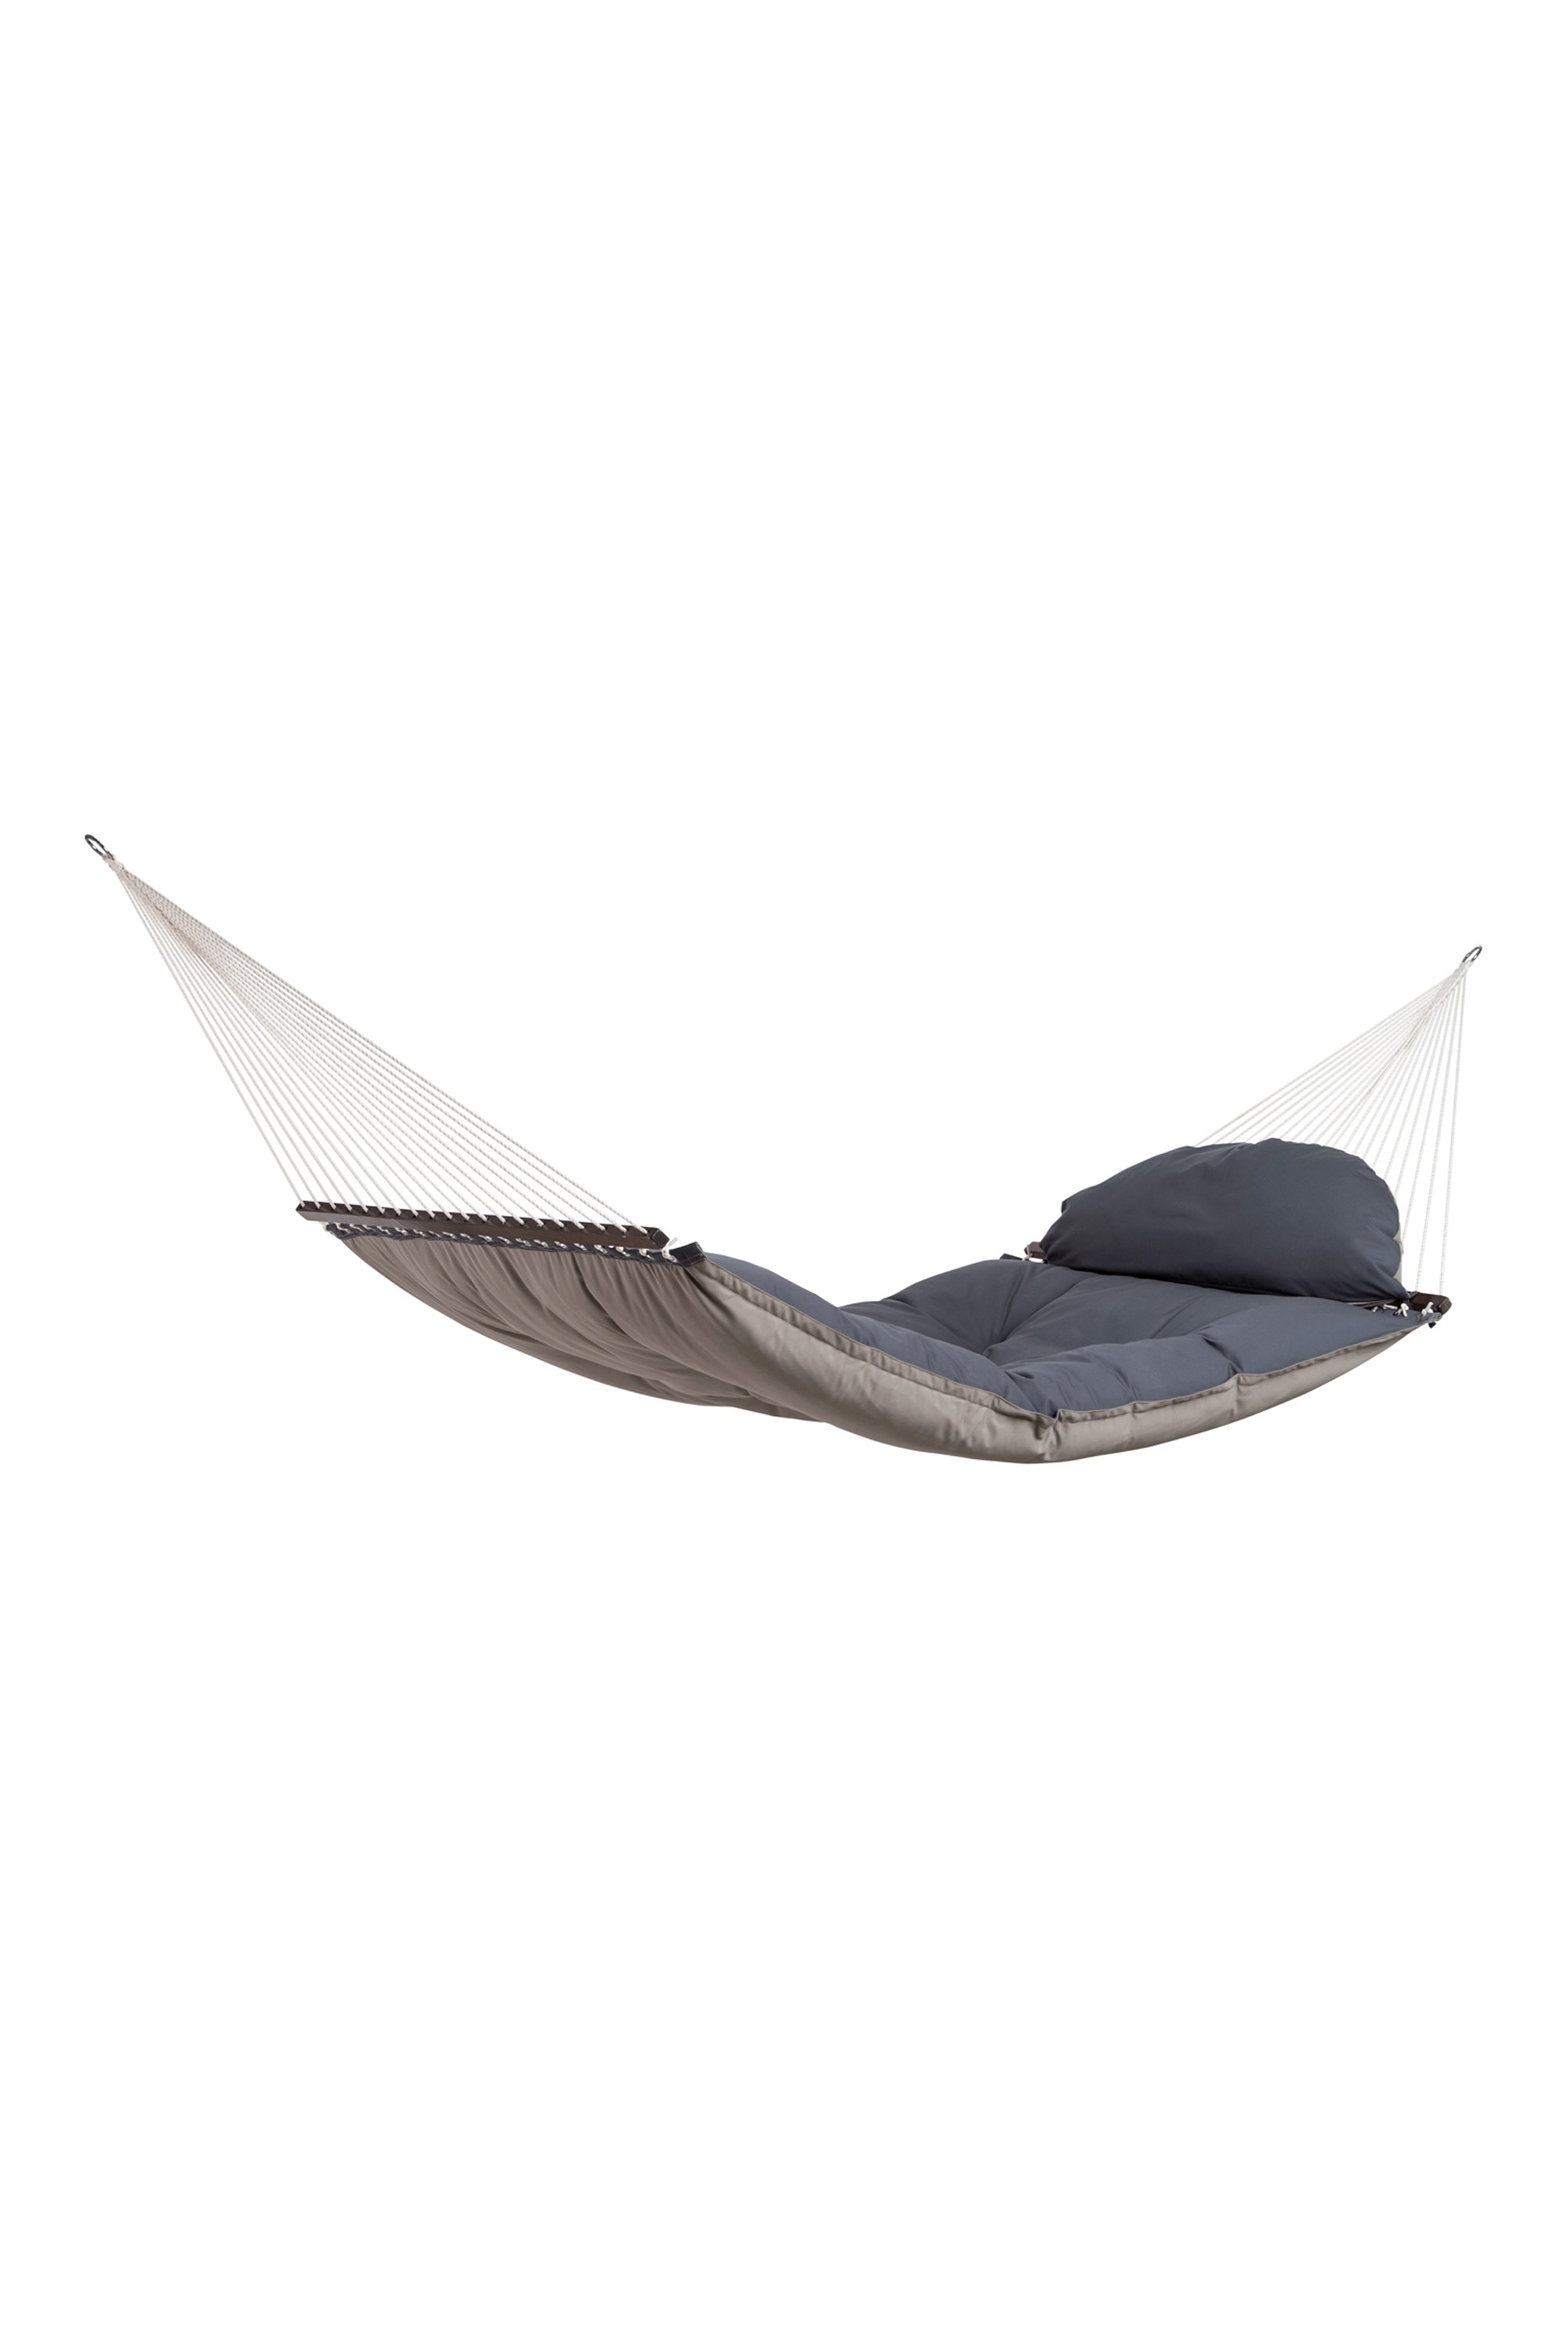 Fat Reversible Extra Thick Luxury Hammock -